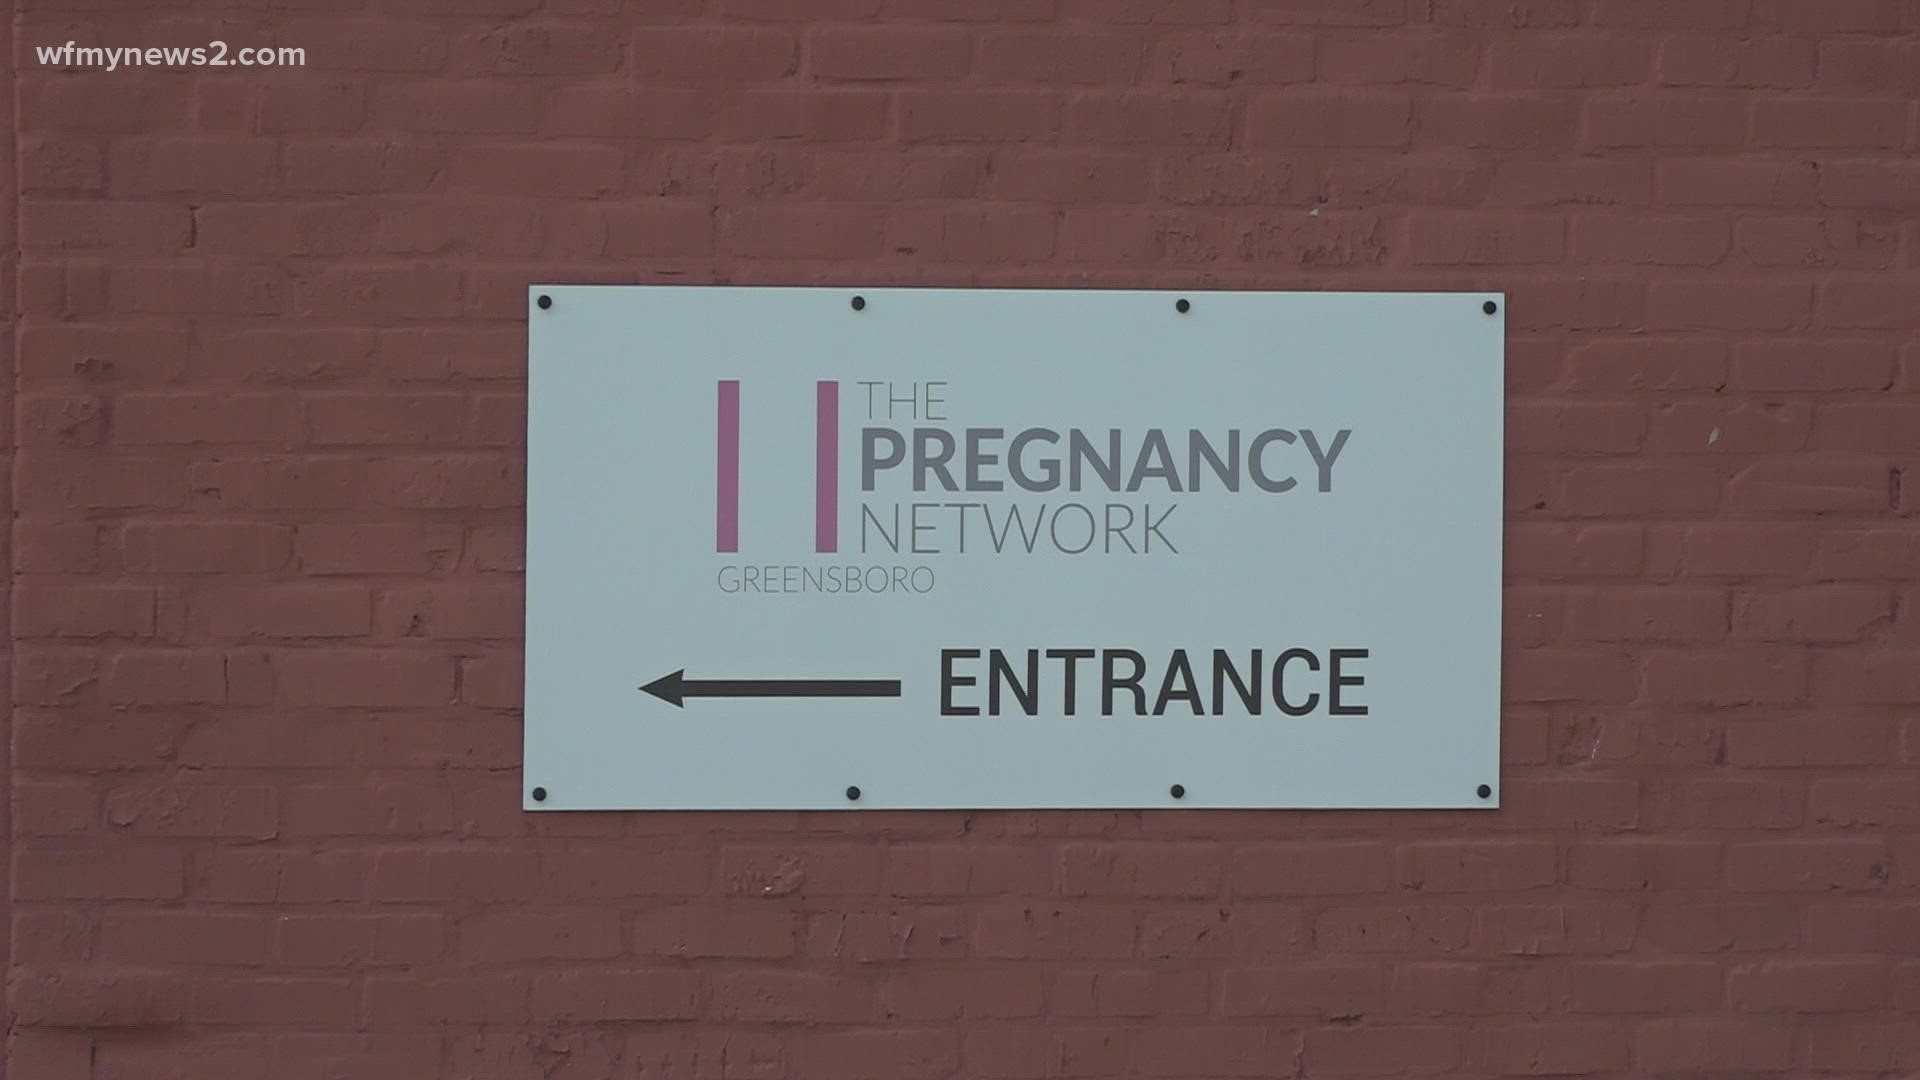 The Pregnancy Network and Planned Parenthood talk to WFMY about what a decision like this would mean for the area.